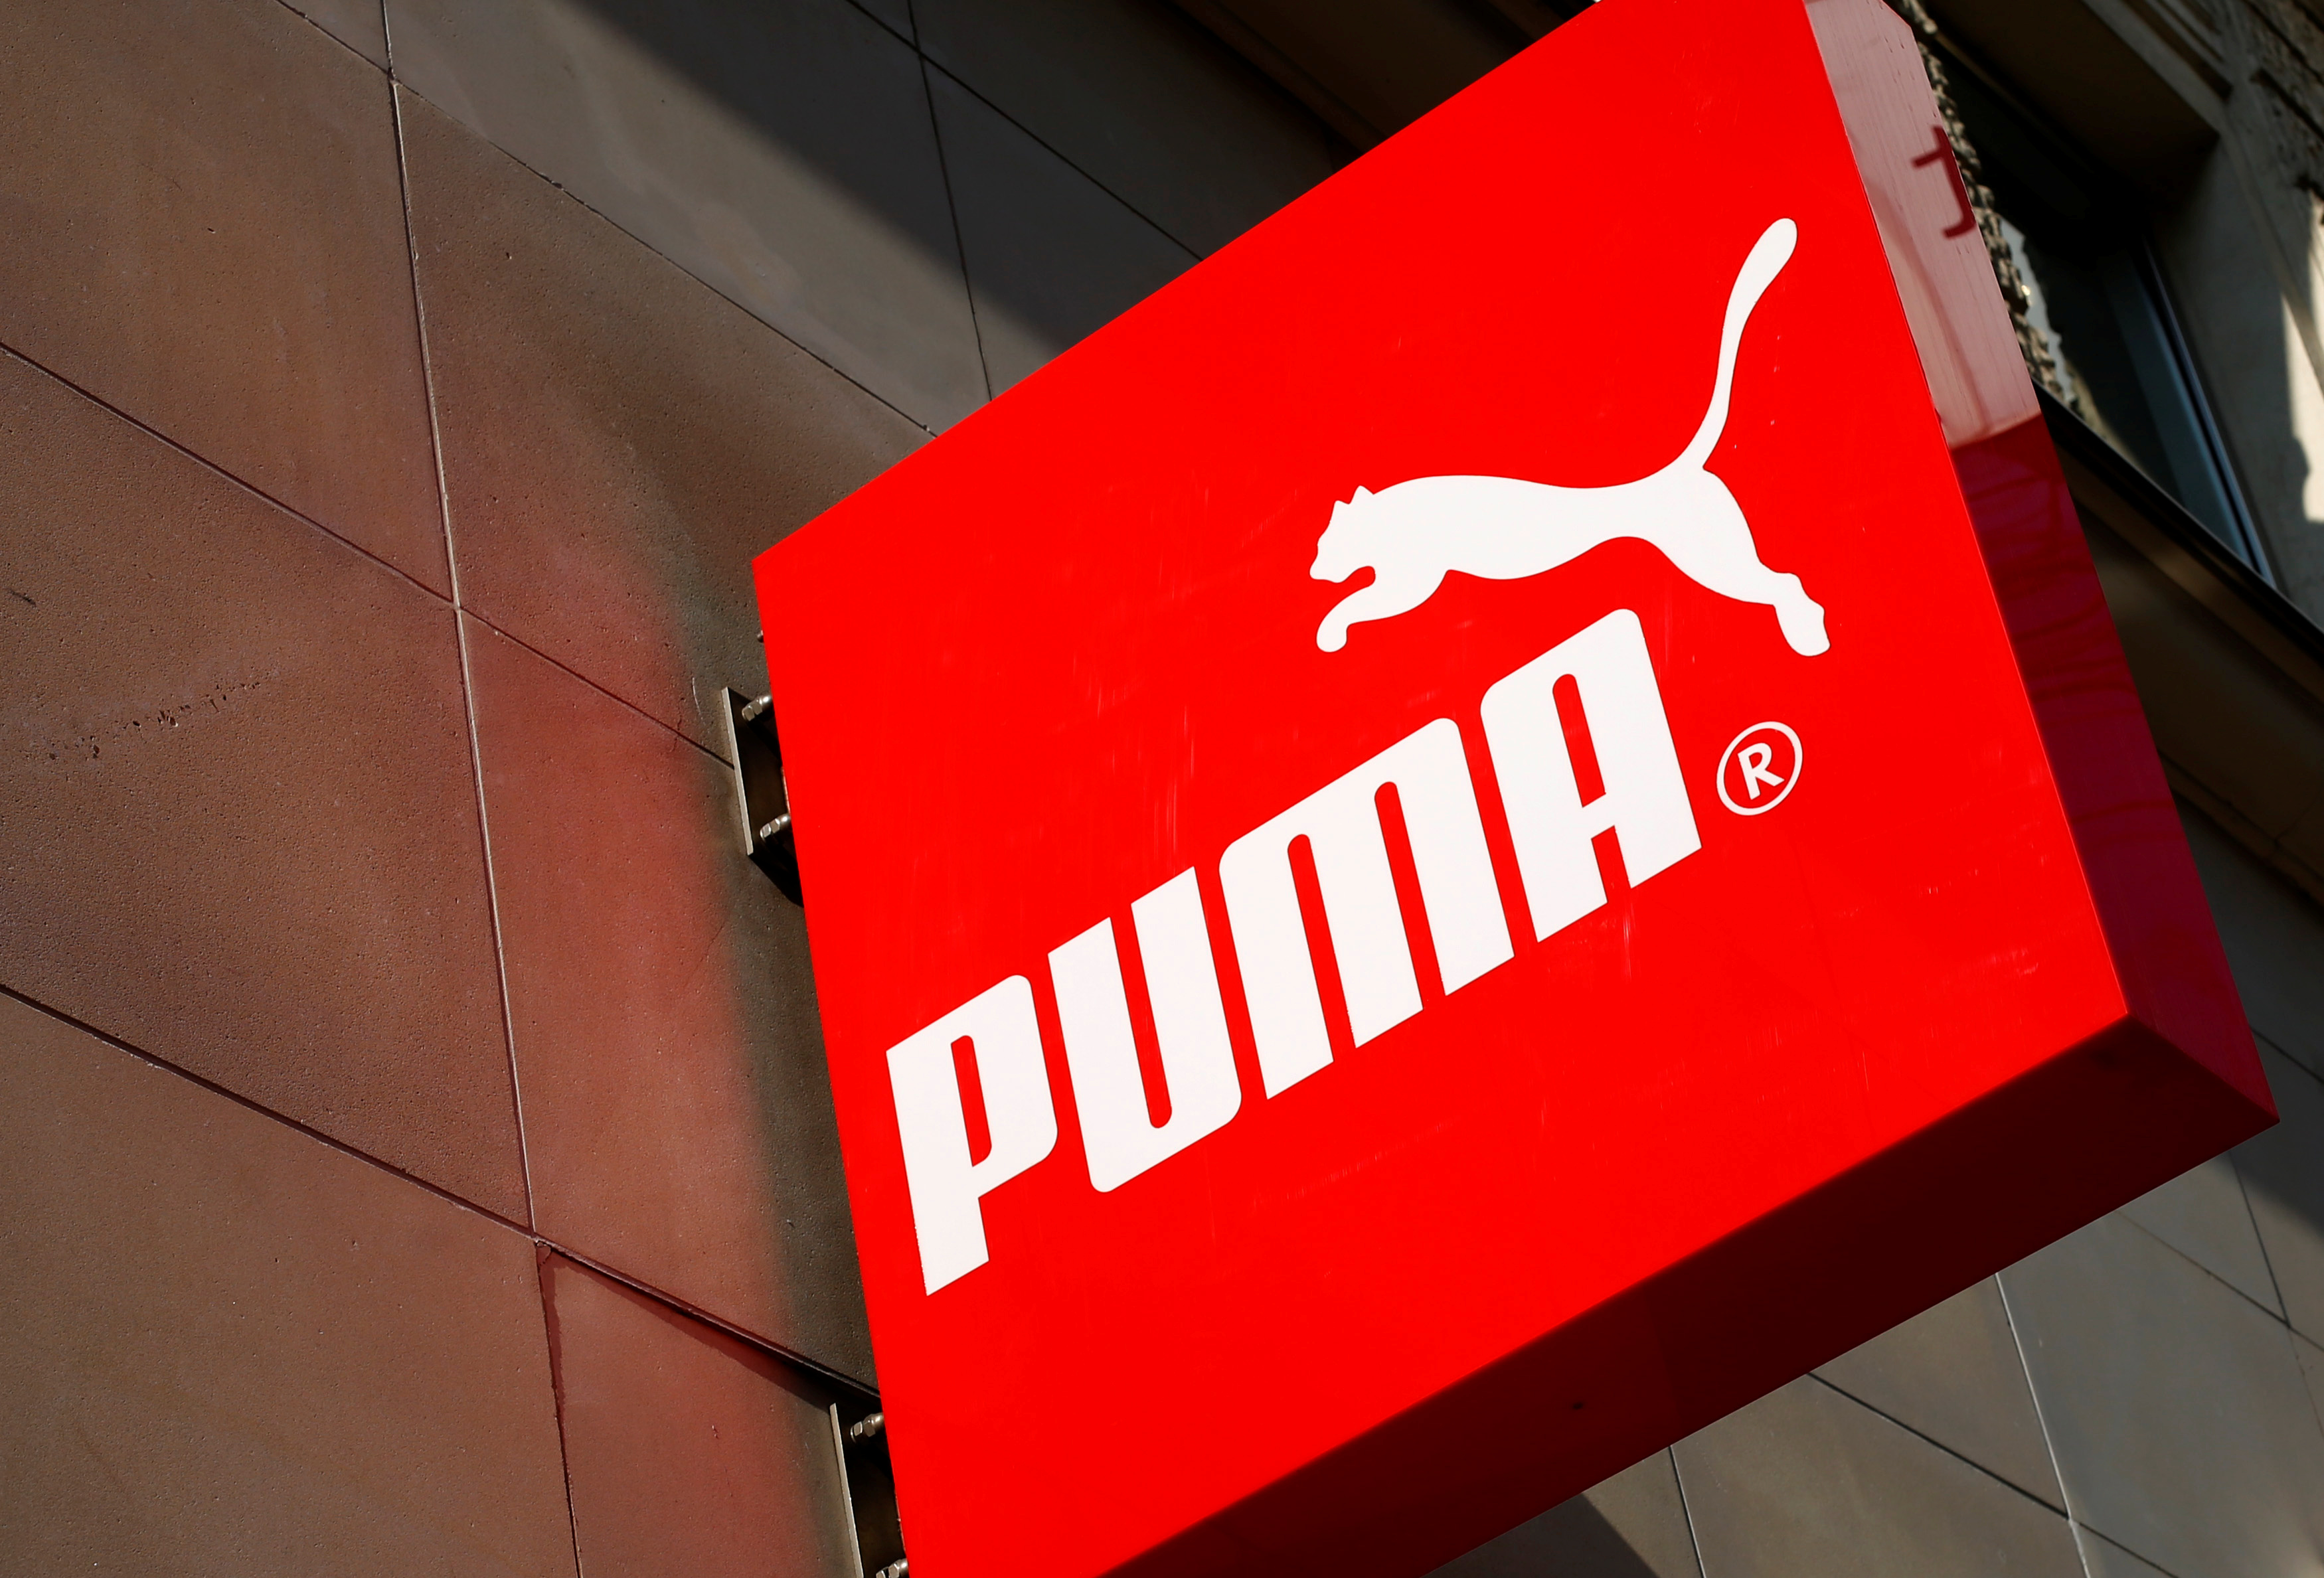 The logo of German sports goods firm Puma is seen at the entrance of one of its stores in Vienna